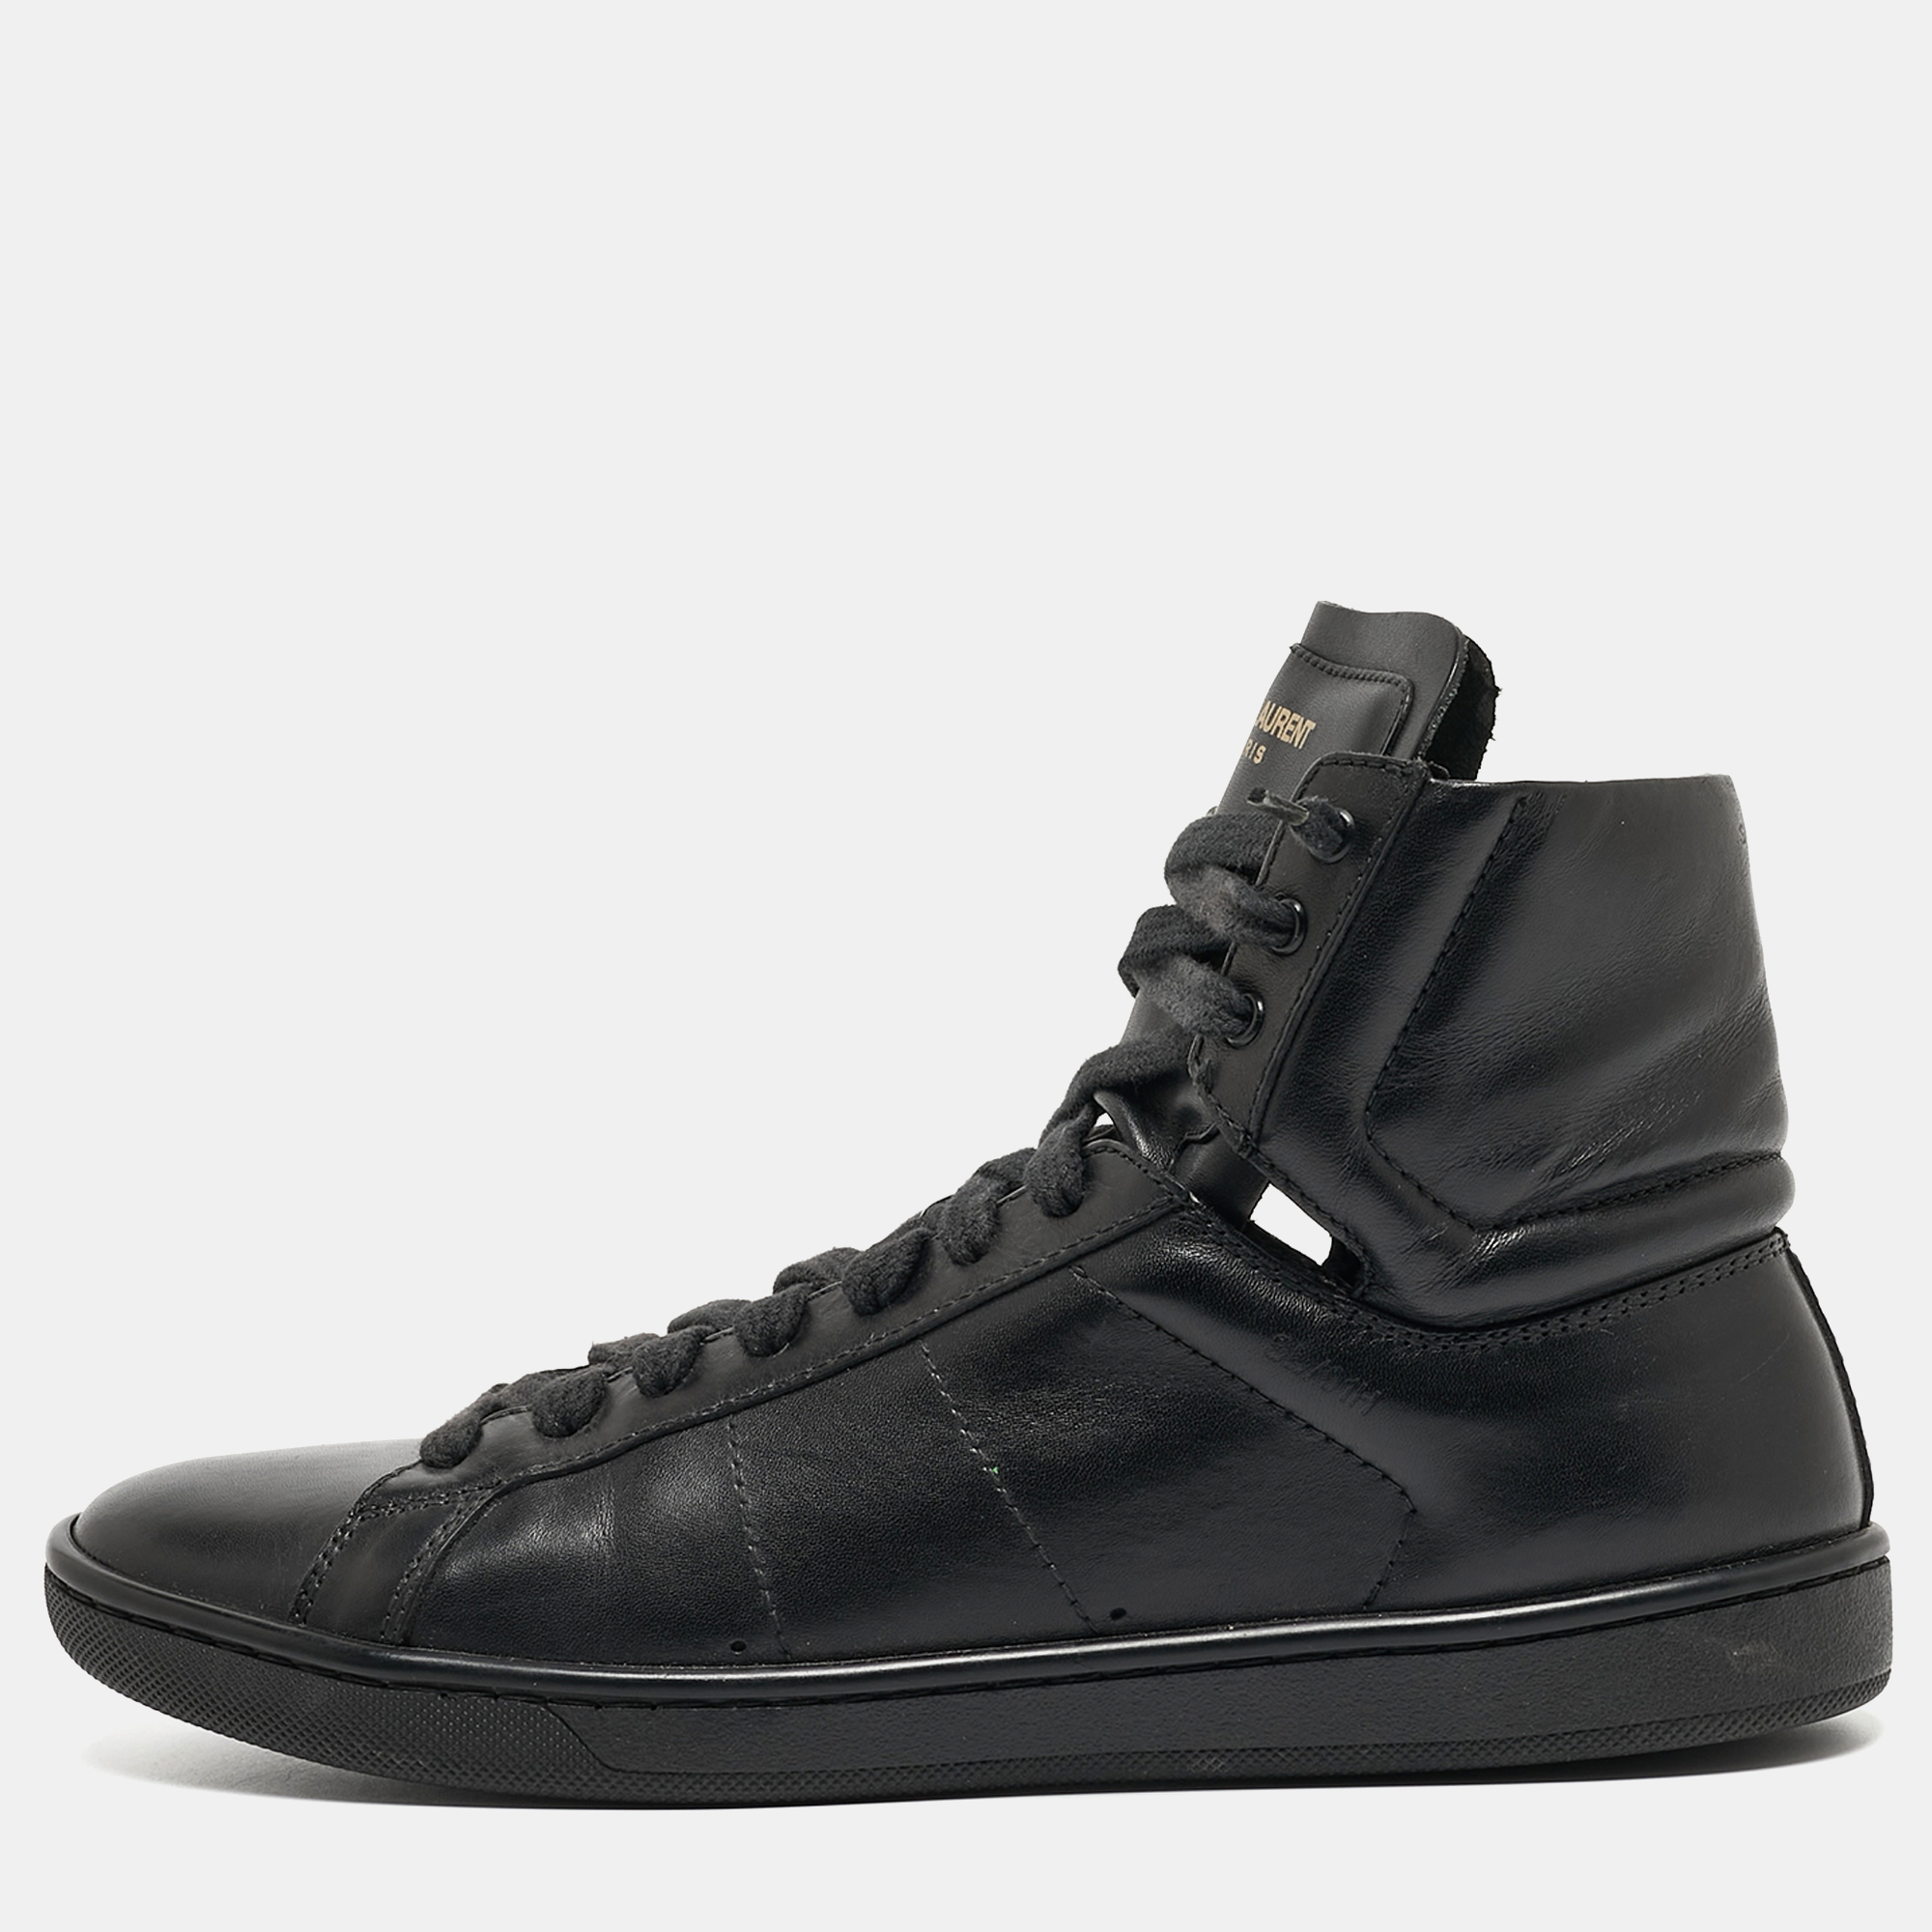 Upgrade your style with these Saint Laurent black sneakers. Meticulously designed for fashion and comfort theyre the ideal choice for a trendy and comfortable stride.